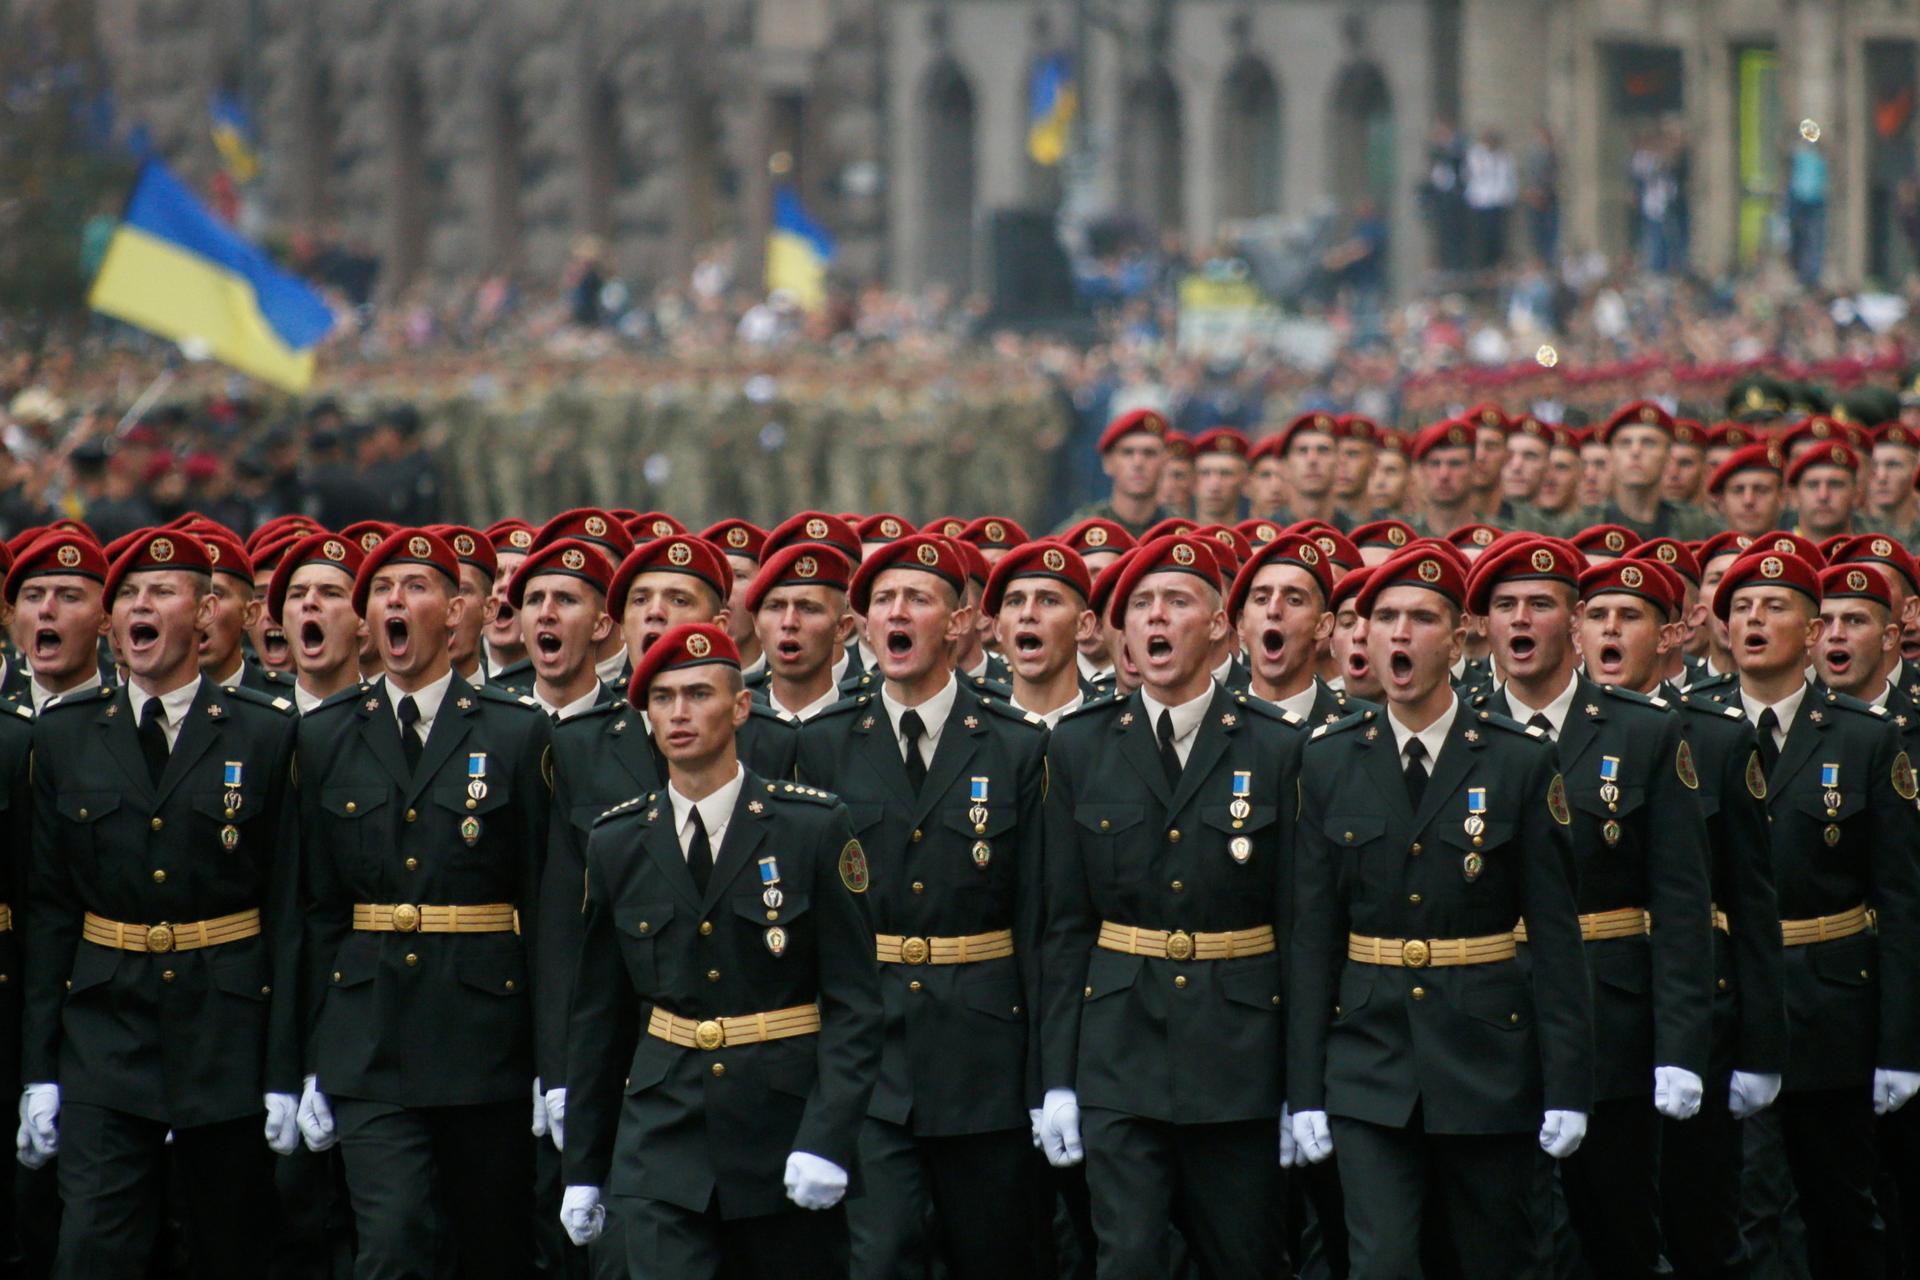 Servicemen march during Ukraine's Independence Day military parade in central Kiev, Ukraine, August 24, 2016.